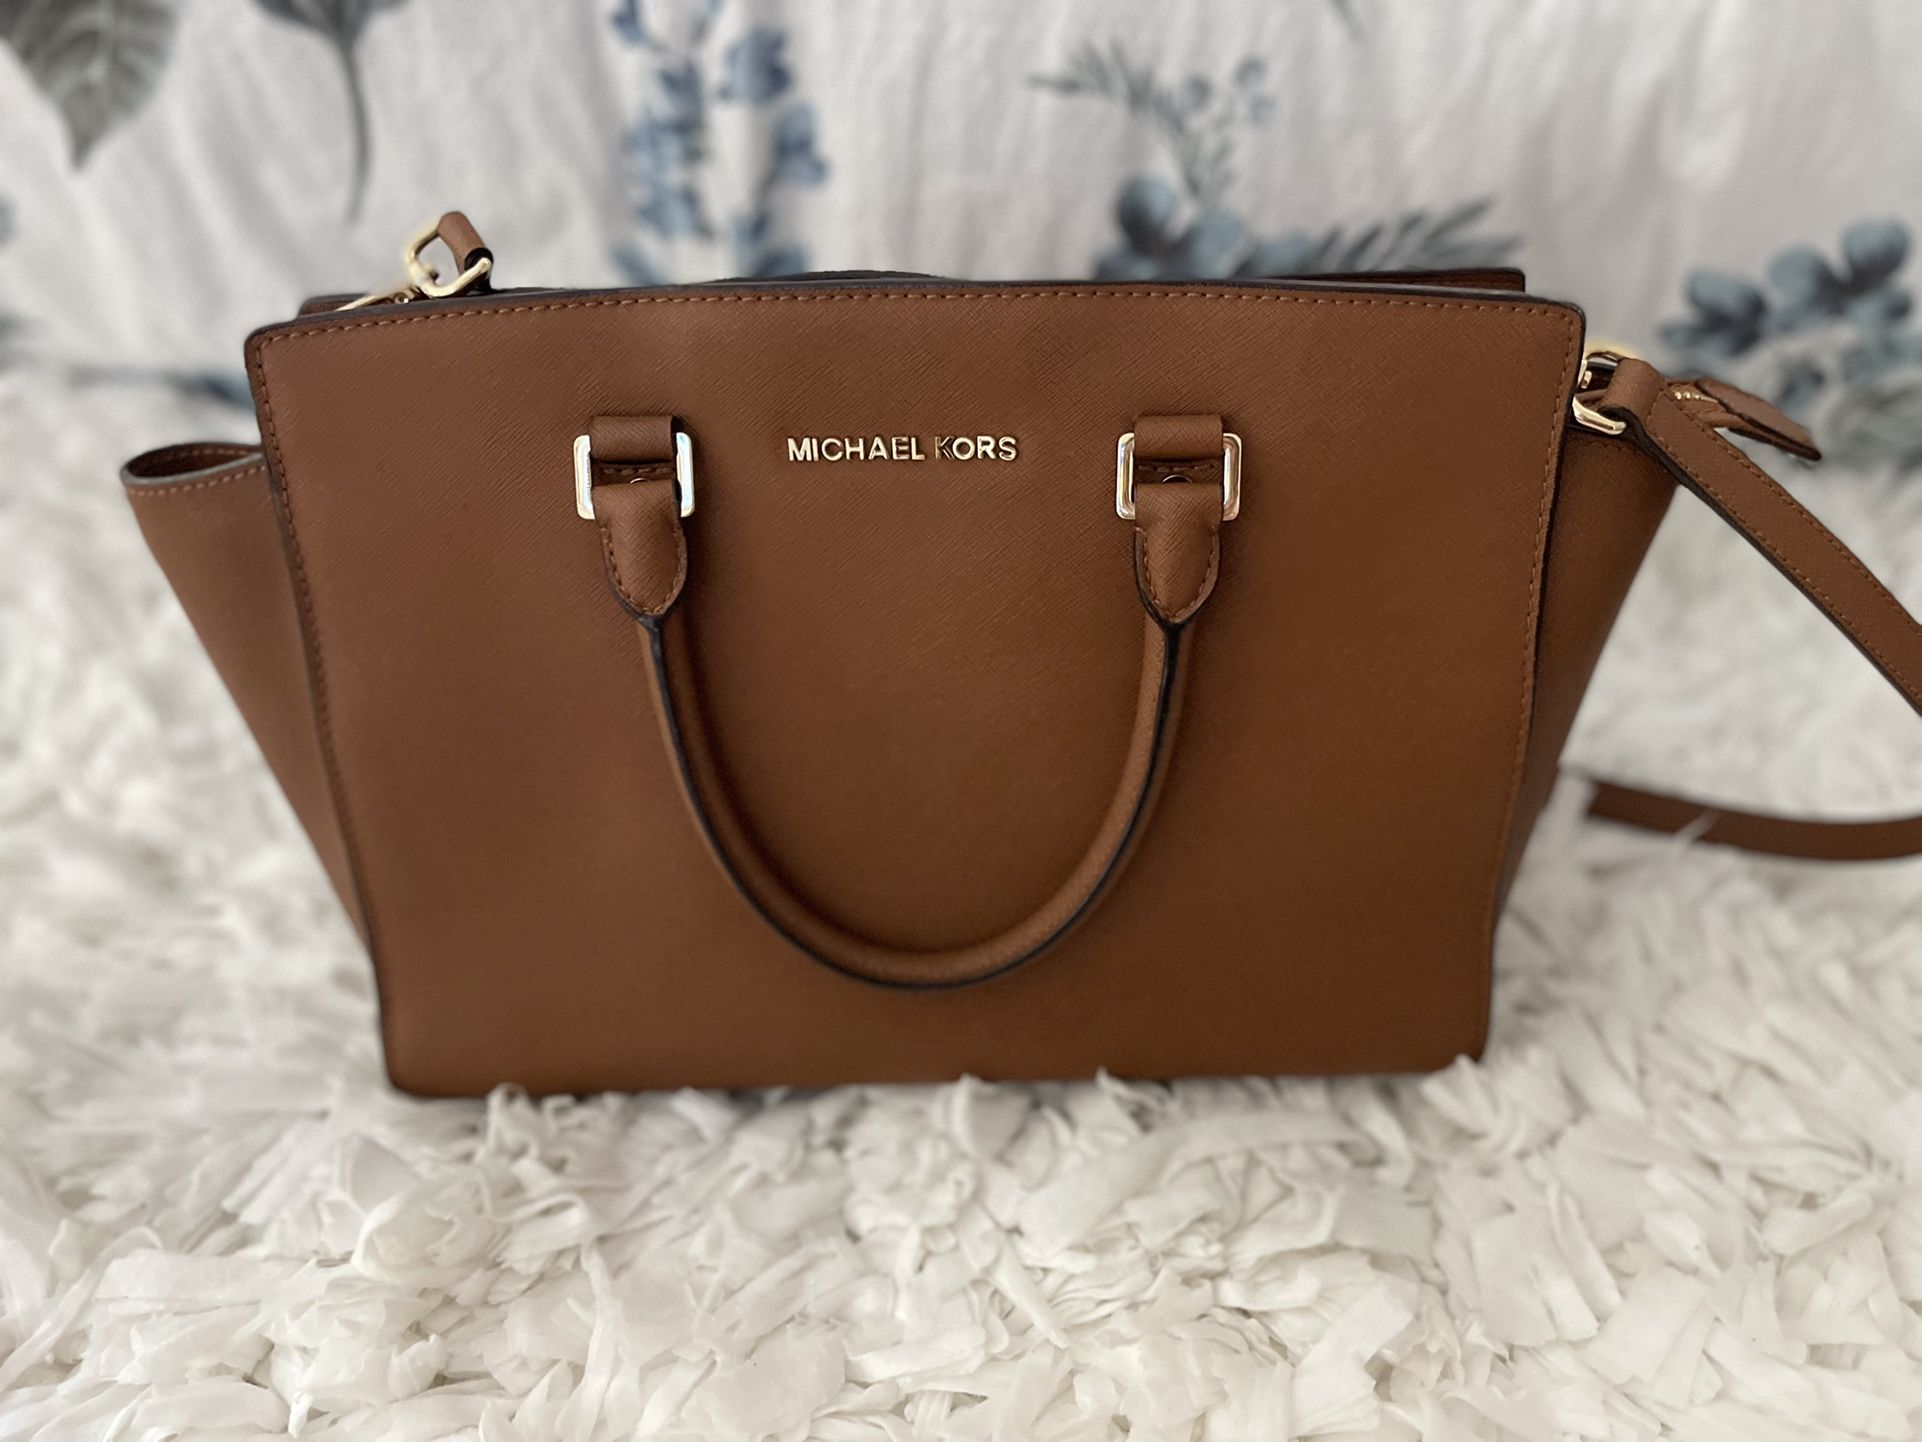 Micheal Kors Bag With Wallet 